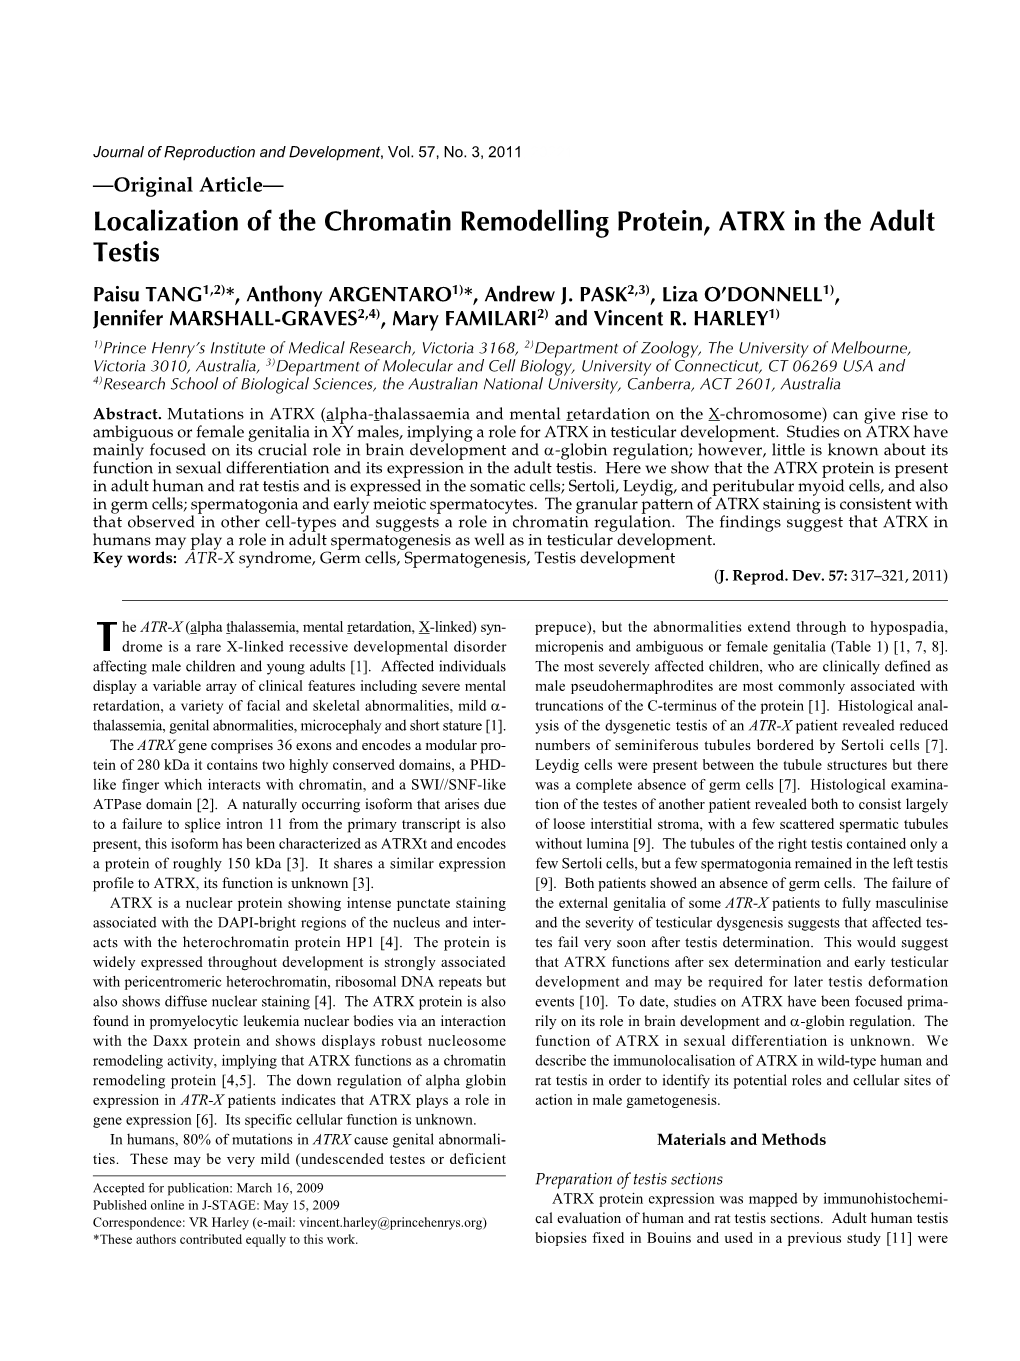 Localization of the Chromatin Remodelling Protein, ATRX in the Adult Testis Paisu TANG1,2)*, Anthony ARGENTARO1)*, Andrew J